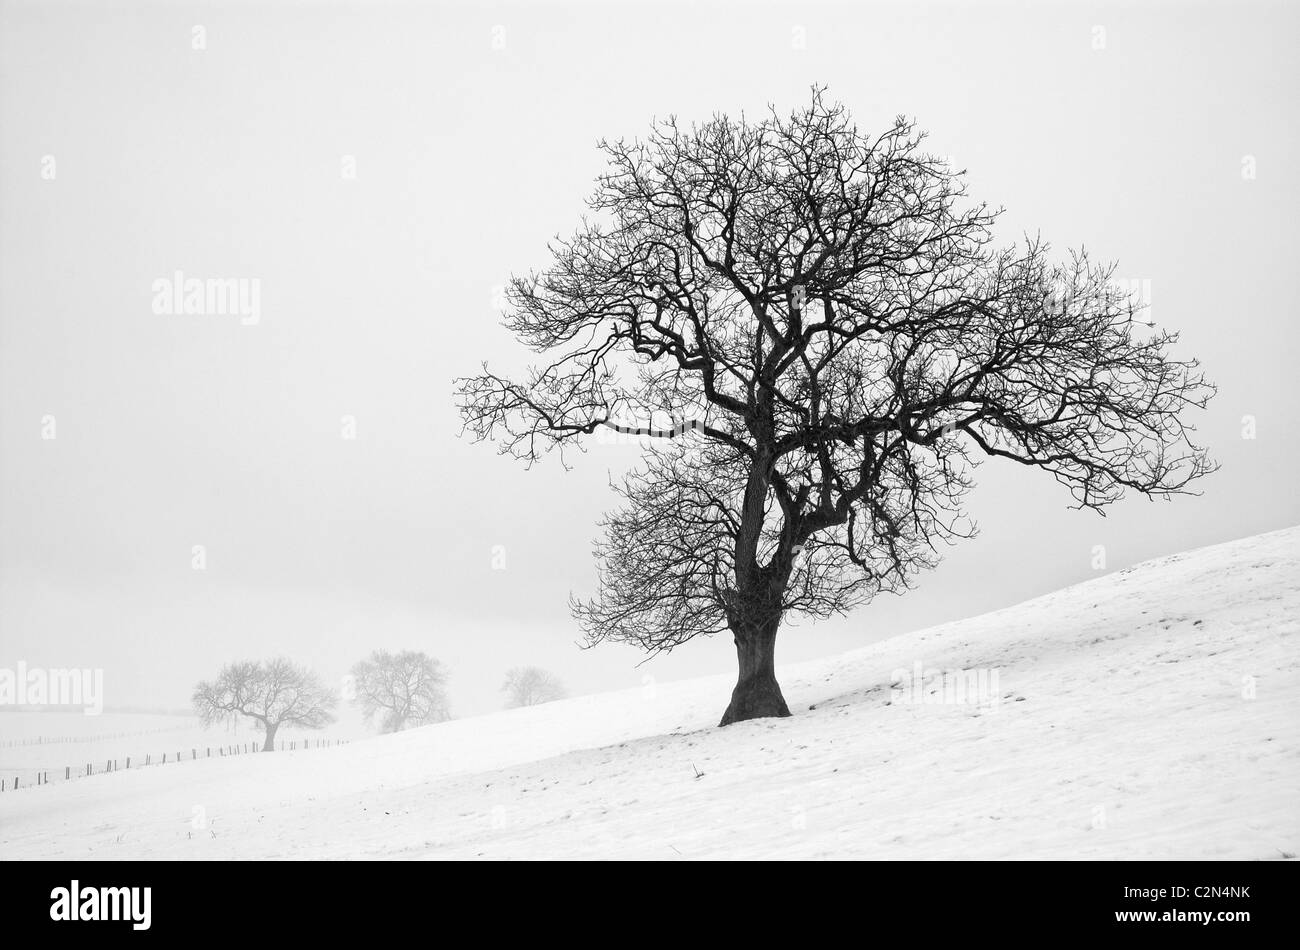 Solitary trees in a winter landscape Stock Photo